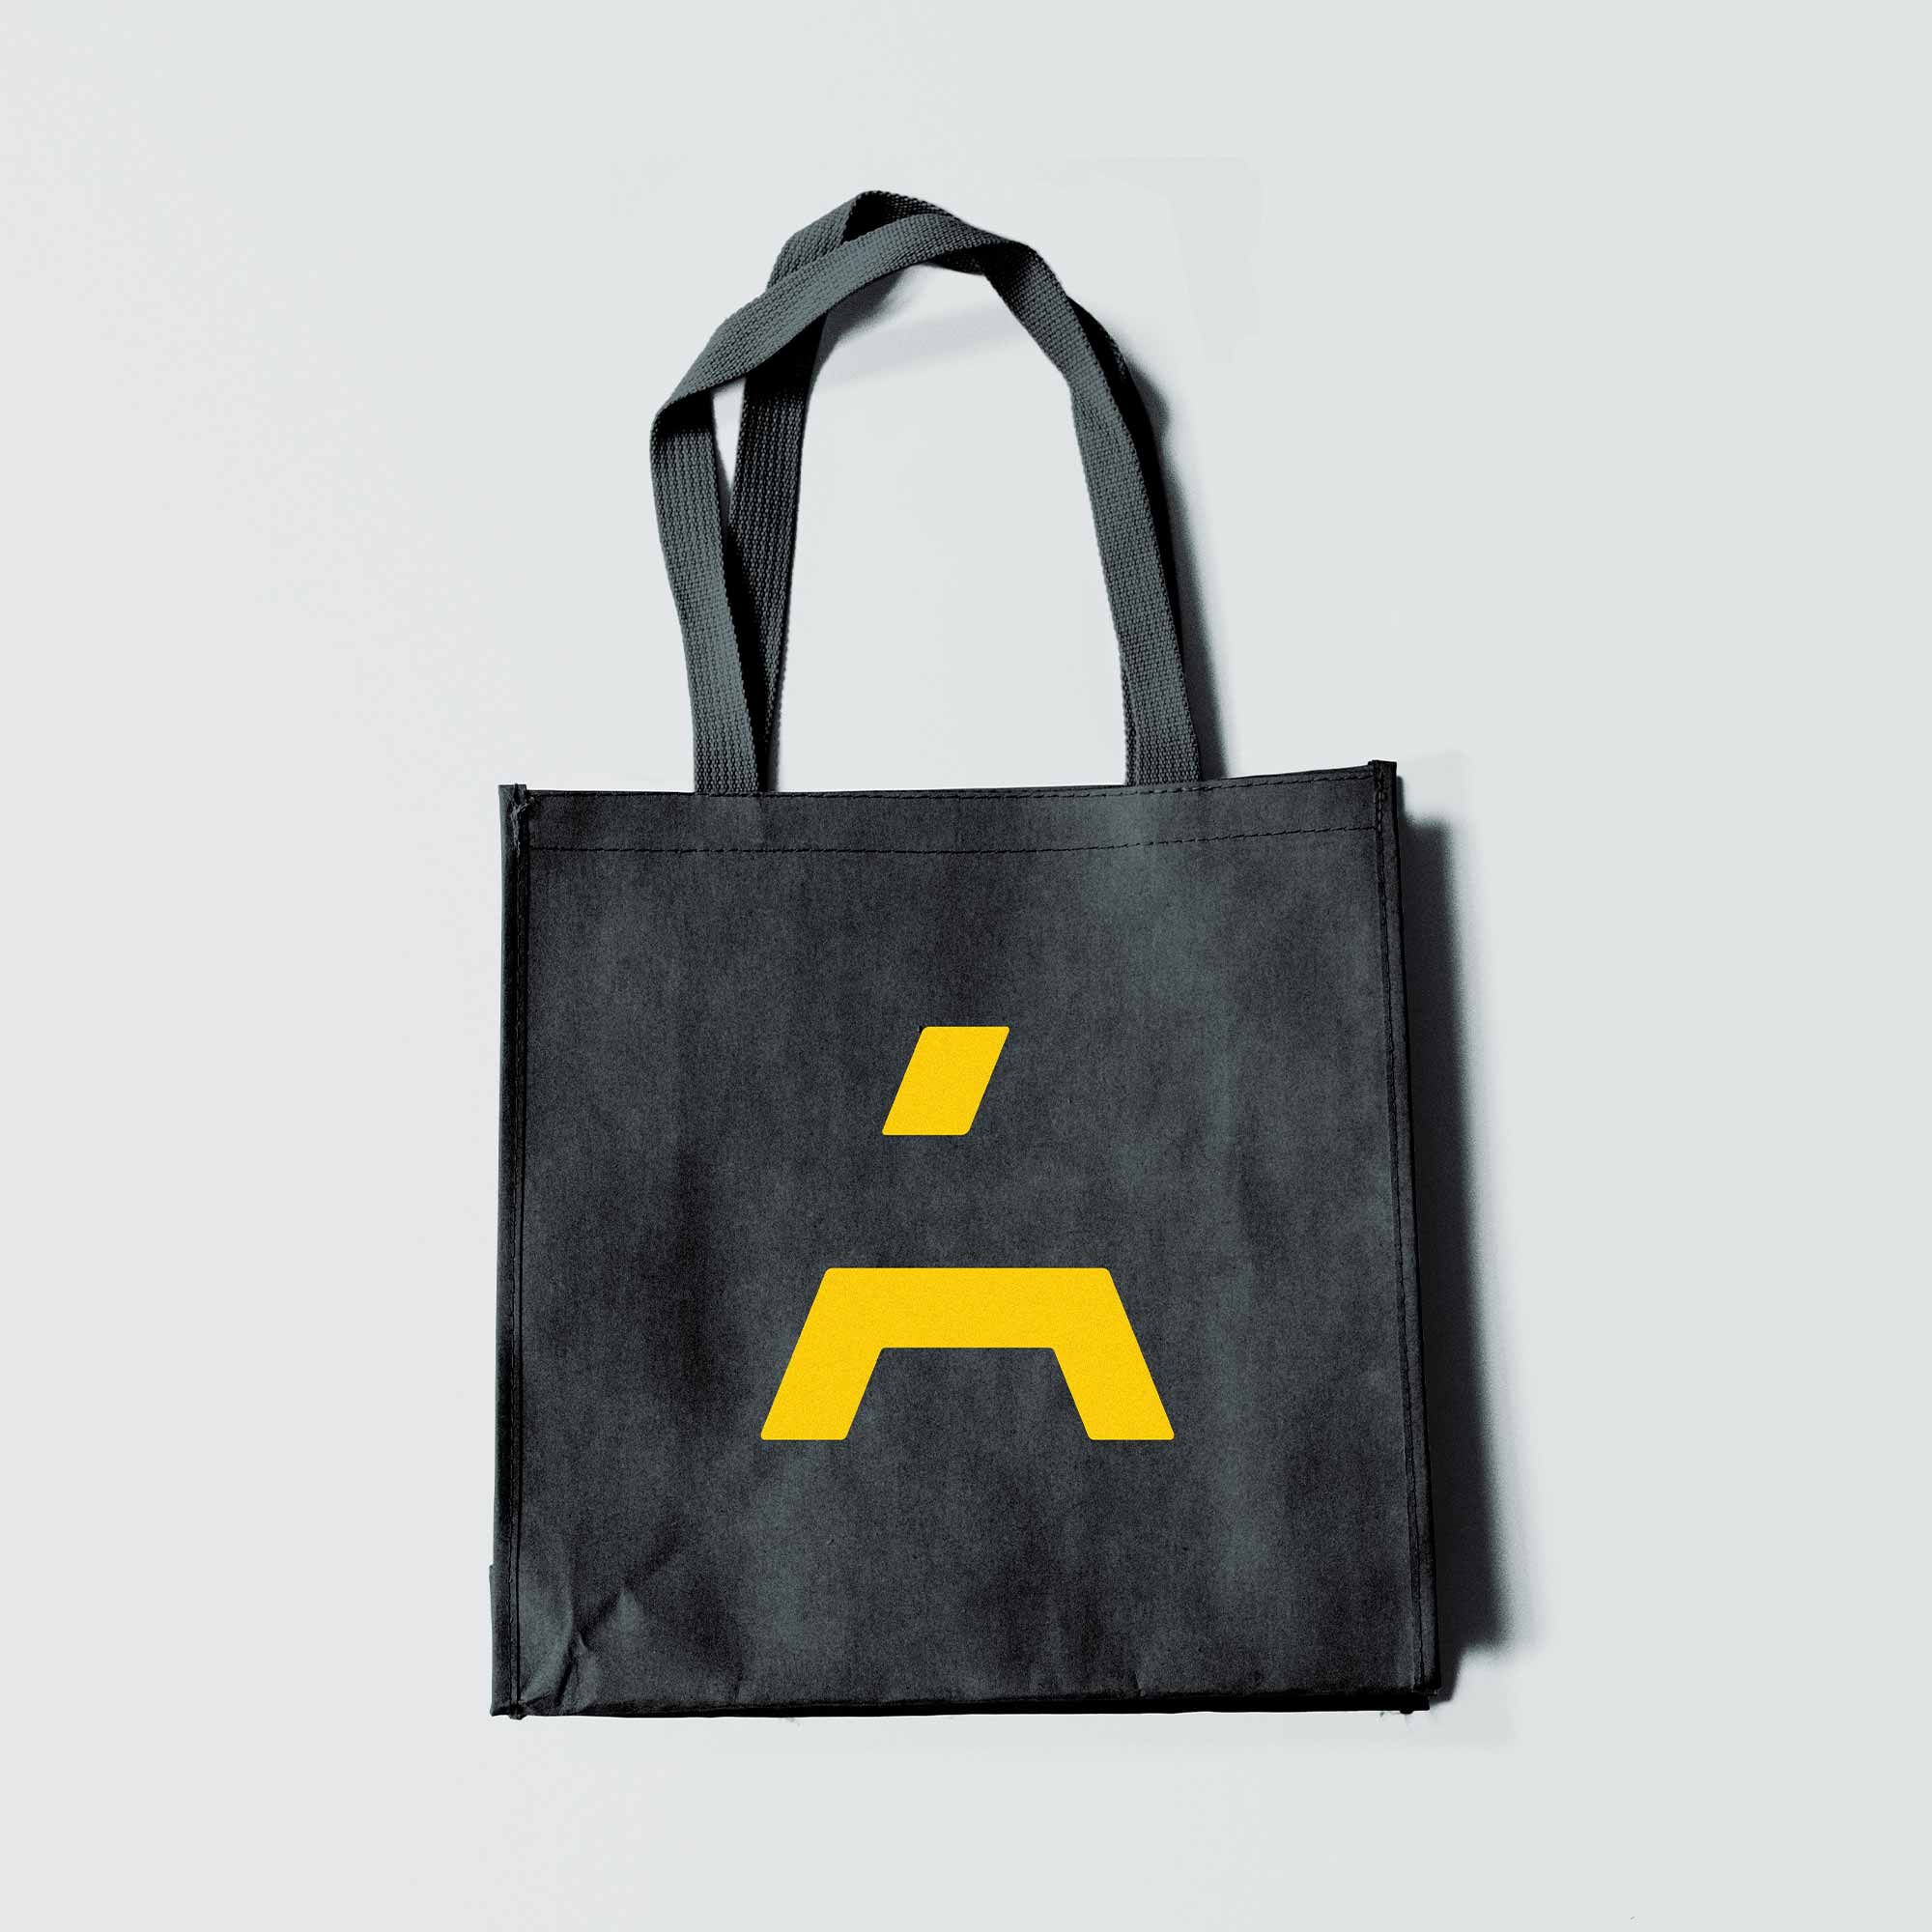 Tote bag with large yellow A symbol on a black cotton